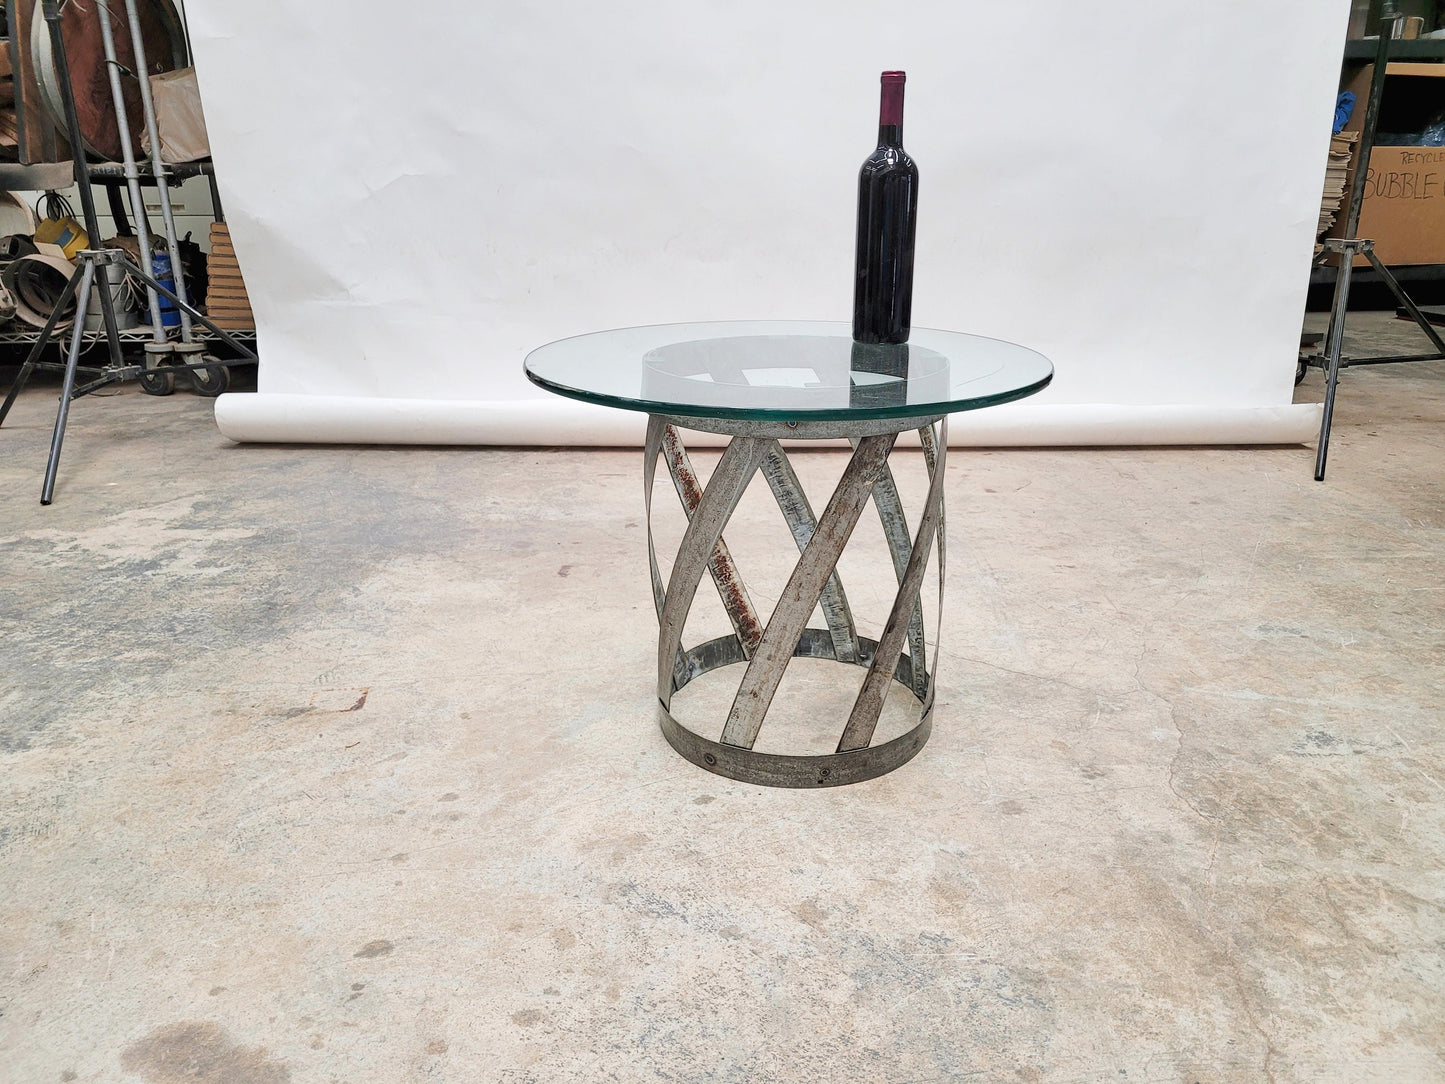 Wine Barrel Side Table - LUTA - made from retired Napa wine barrel rings. 100% Recycled!